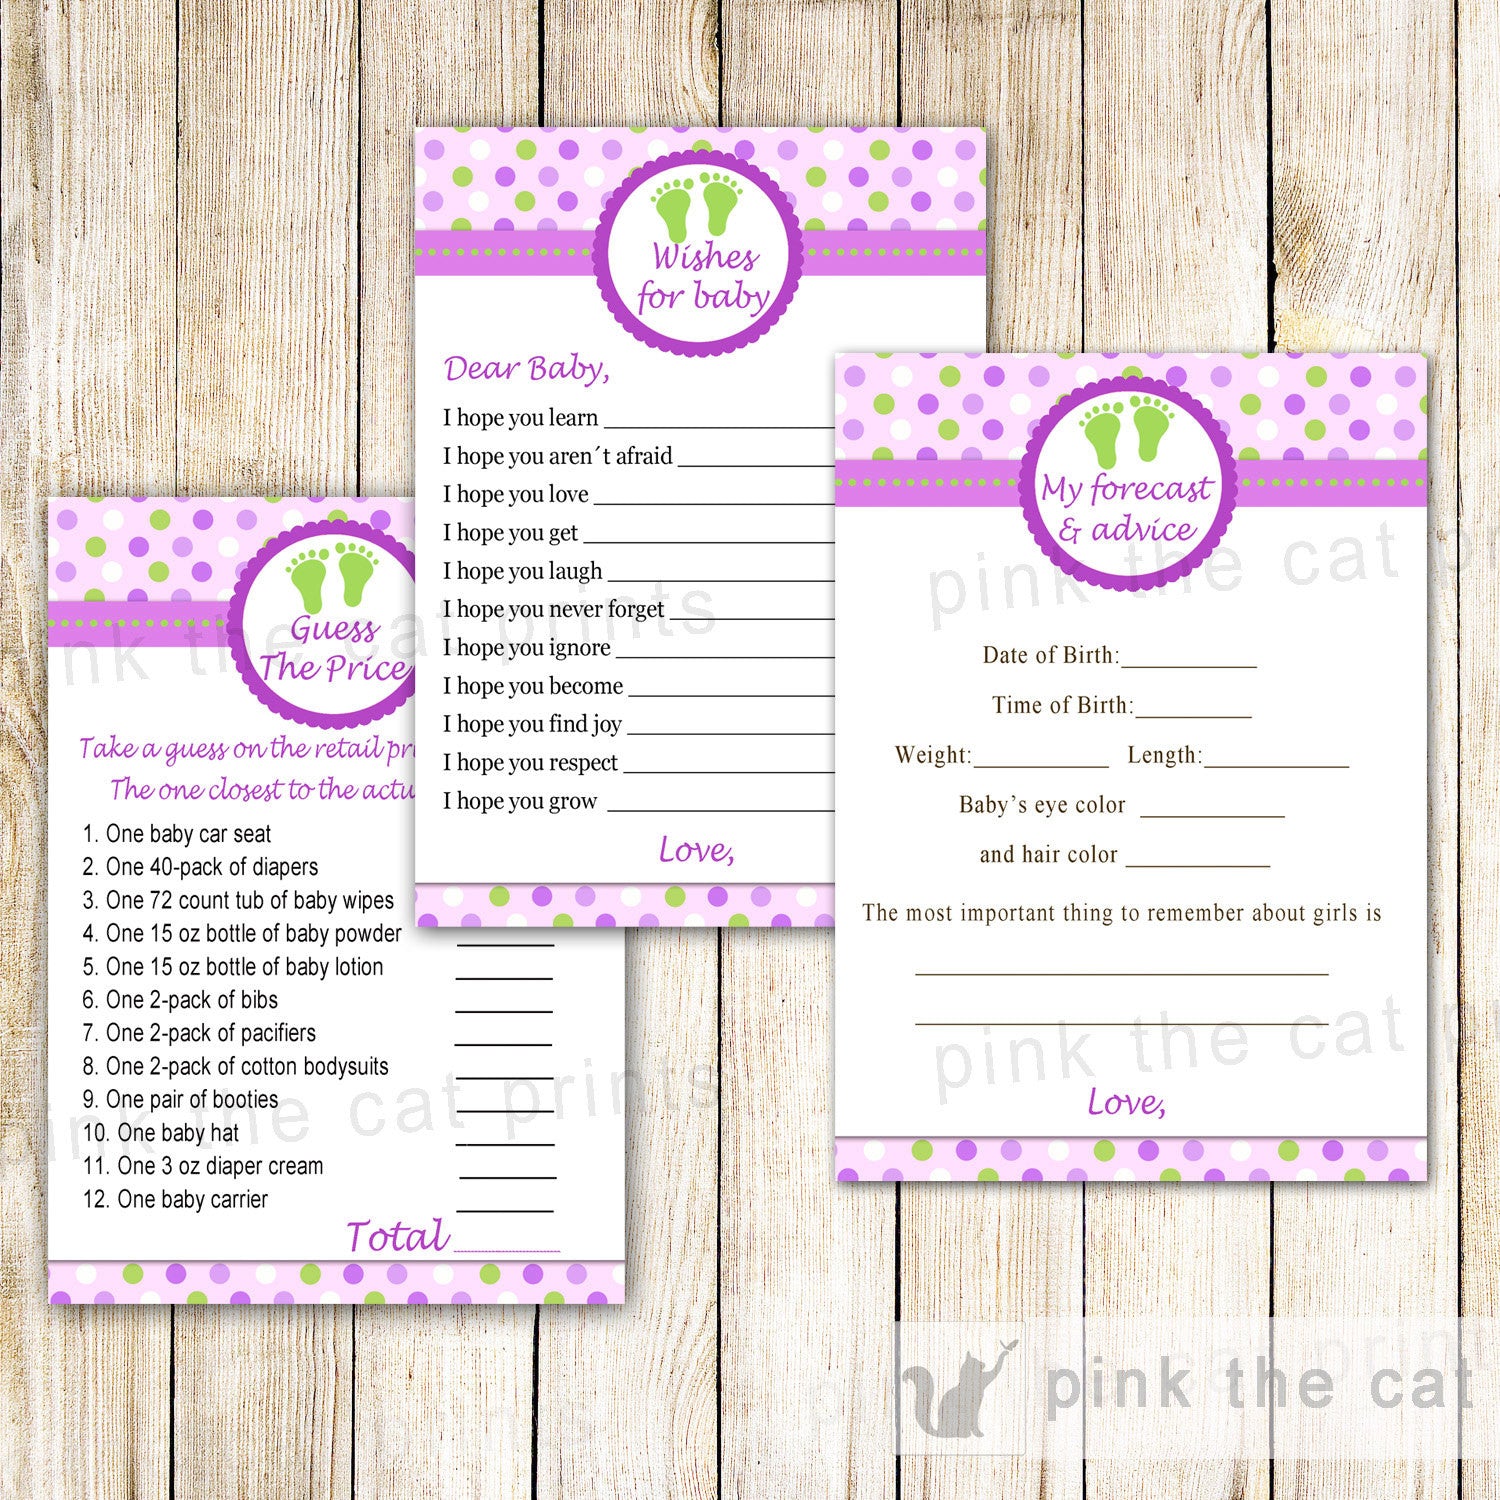 Baby Shower Games Purple Green Wishes for Baby, Advice Card & More